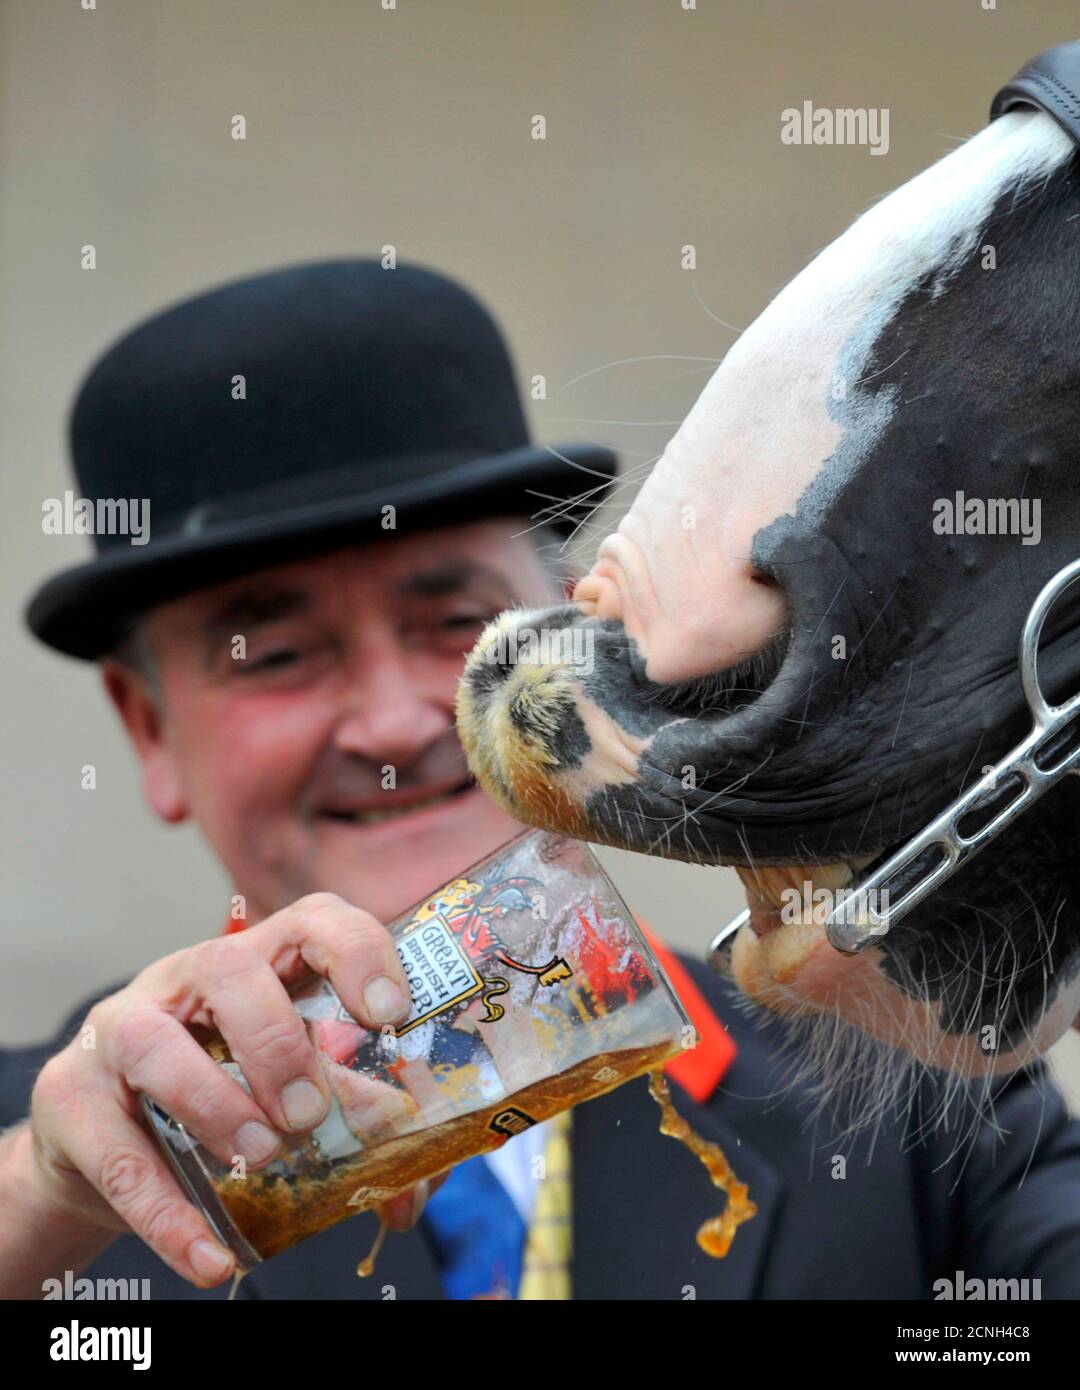 A shire horse pulling a beer wagon drinks real ale at the Great British Beer Festival at Earl's Court in west London August 3, 2010. The Campaign for Real Ale (CAMRA) which host the annual festival say that there are now over 750 breweries across the UK, producing more than 2,500 different varieties of beer. REUTERS/Toby Melville (BRITAIN - Tags: SOCIETY ANIMALS) Stock Photo